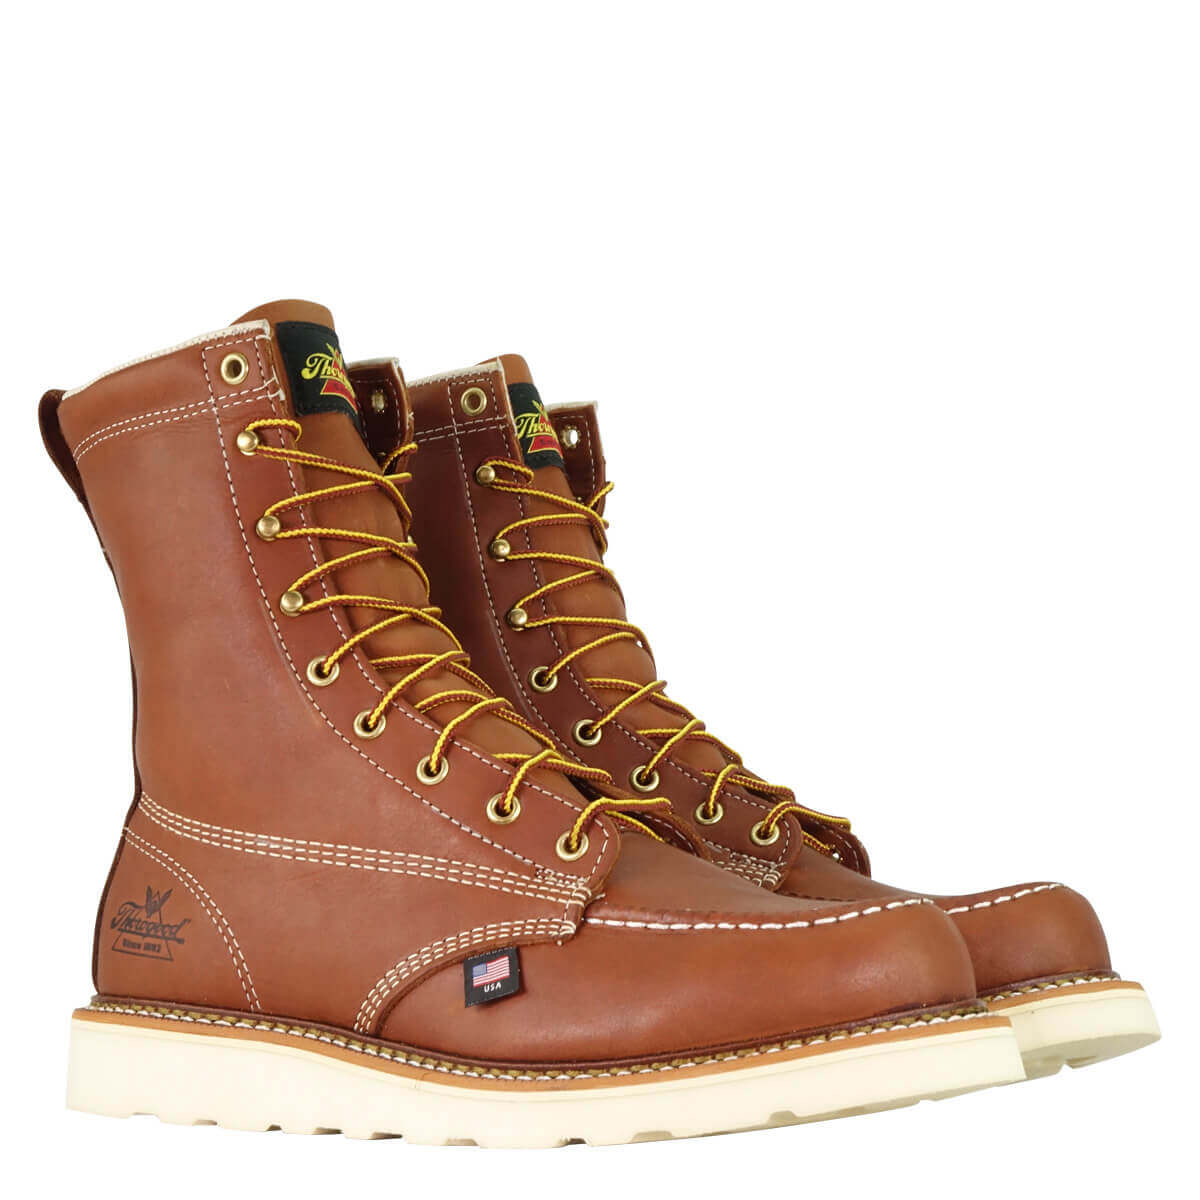 Thorogood American Heritage 8 Inch Tobacco MAXWear Wedge Moc Toe Boots from Columbia Safety